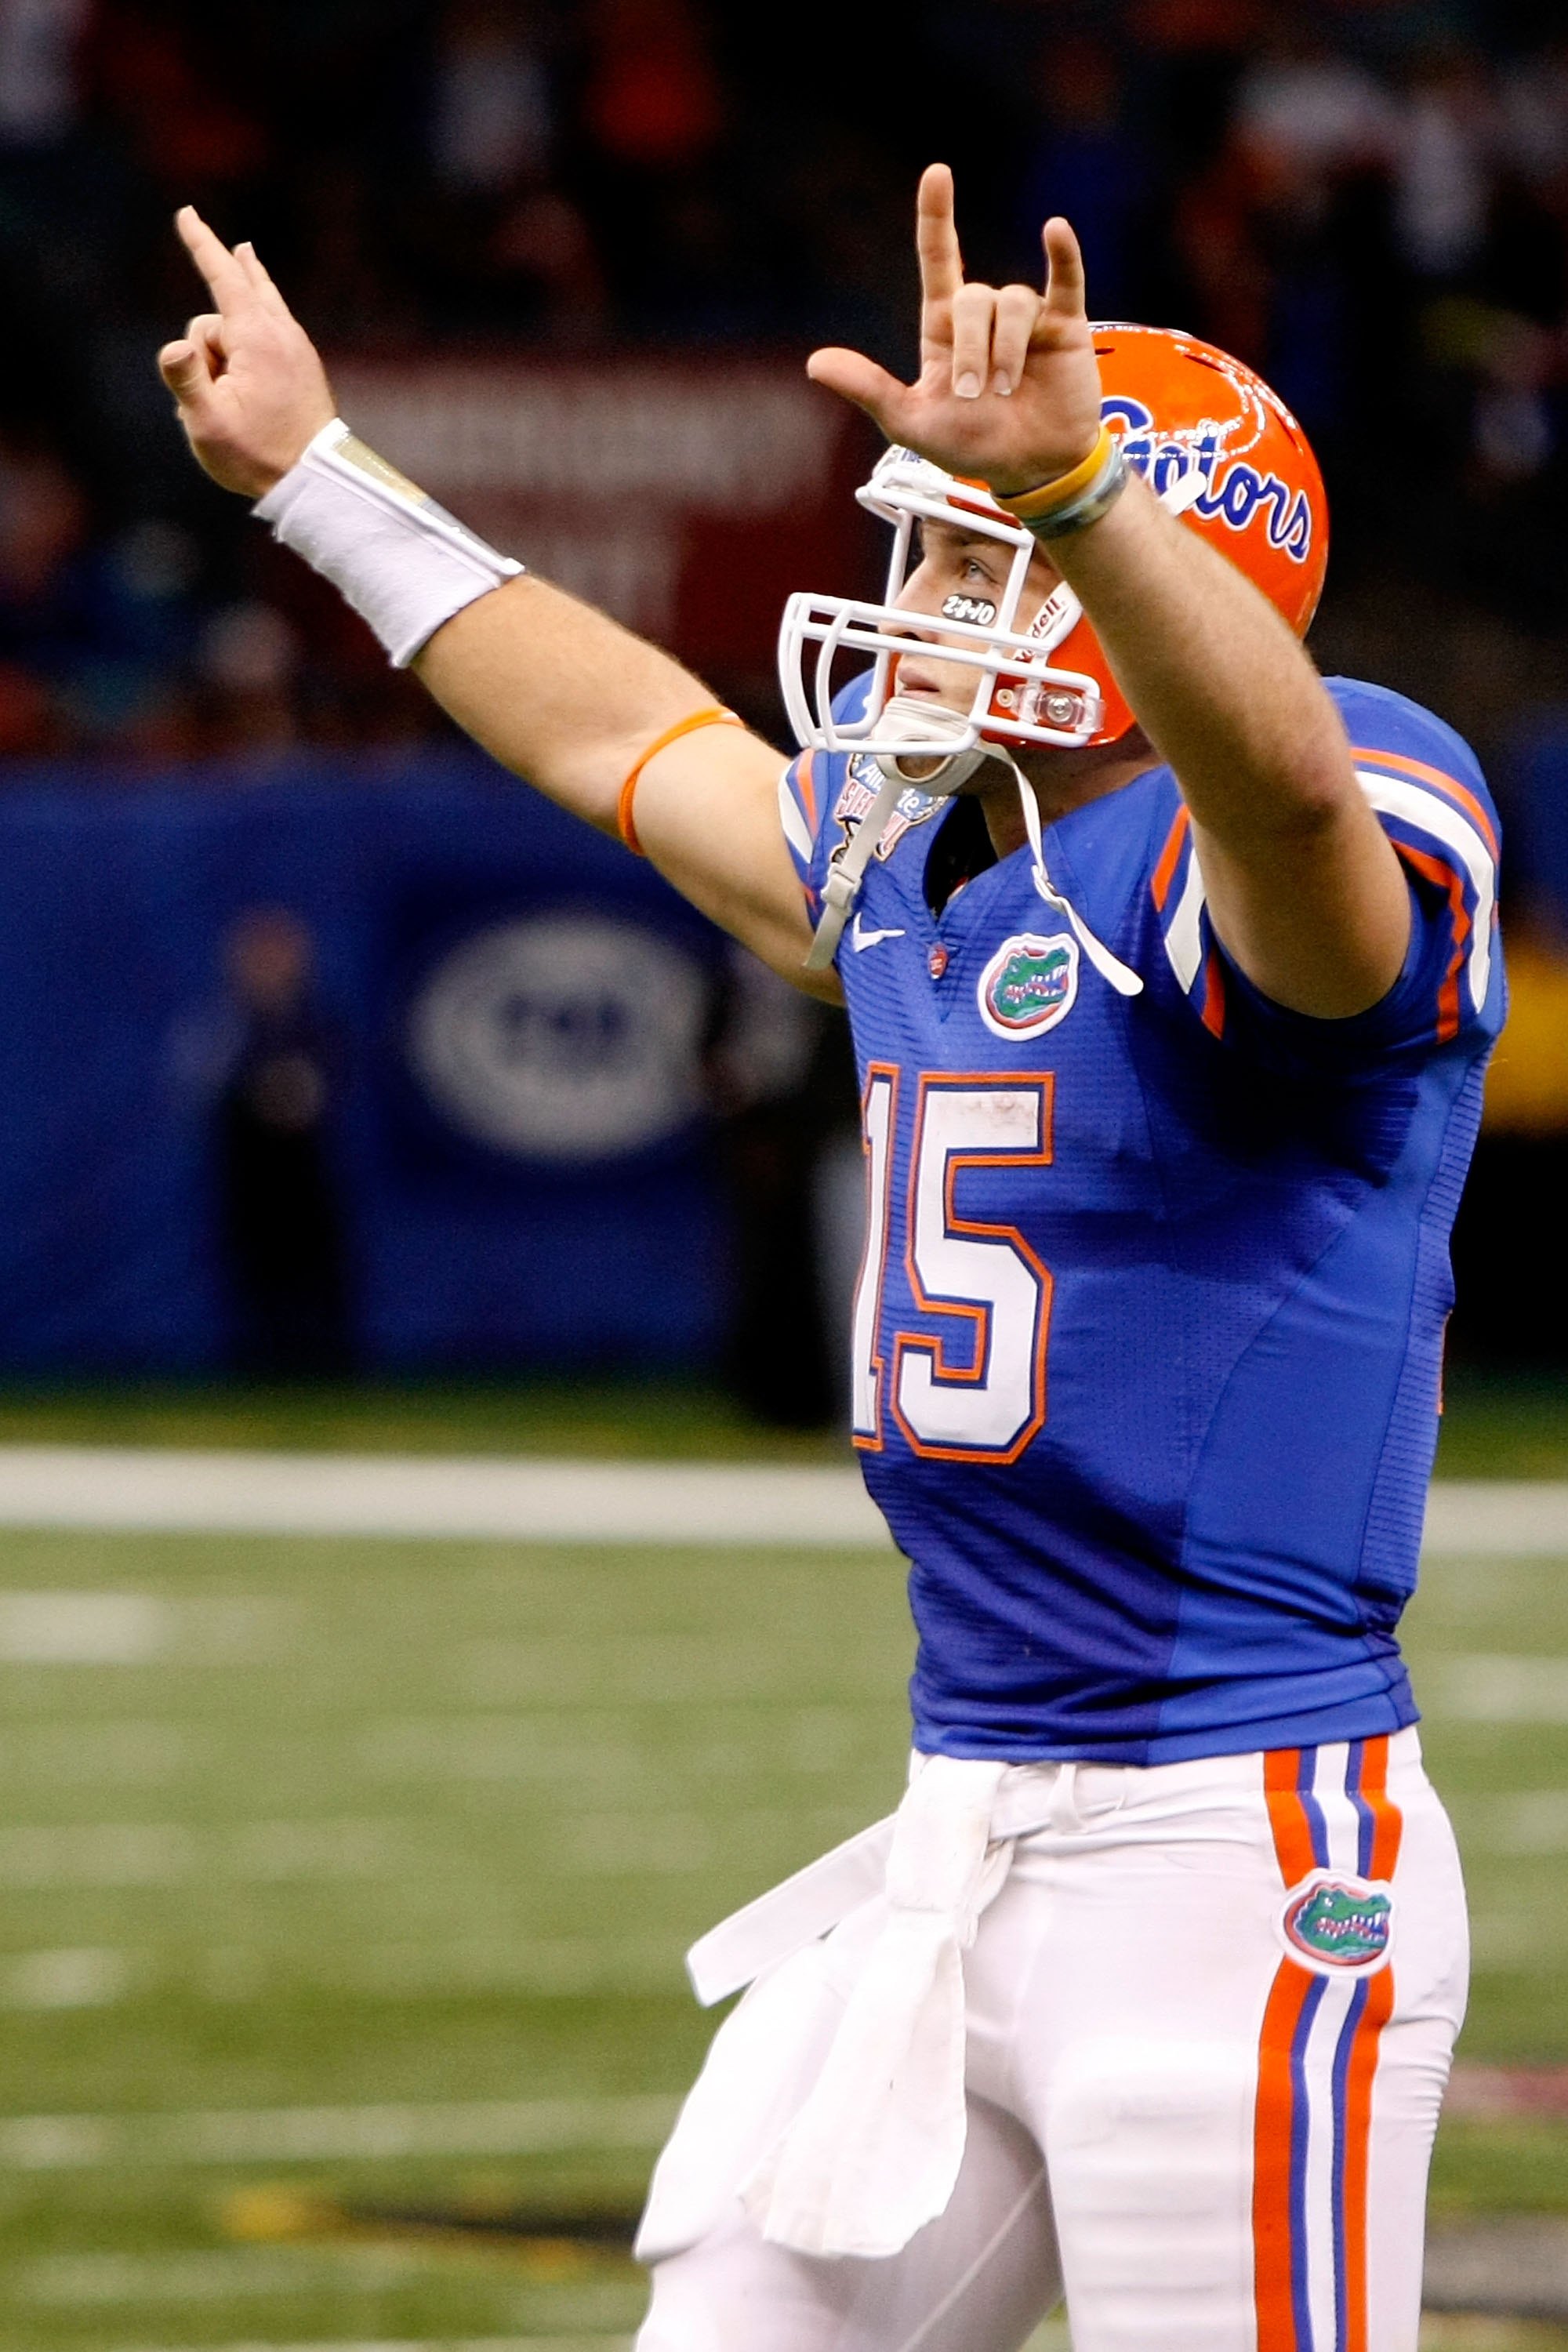 NEW ORLEANS - JANUARY 01:  Tim Tebow #15 of the Florida Gators celebrates after a play against the Cincinnati Bearcats during the Allstate Sugar Bowl at the Louisana Superdome on January 1, 2010 in New Orleans, Louisiana.  (Photo by Kevin C. Cox/Getty Ima